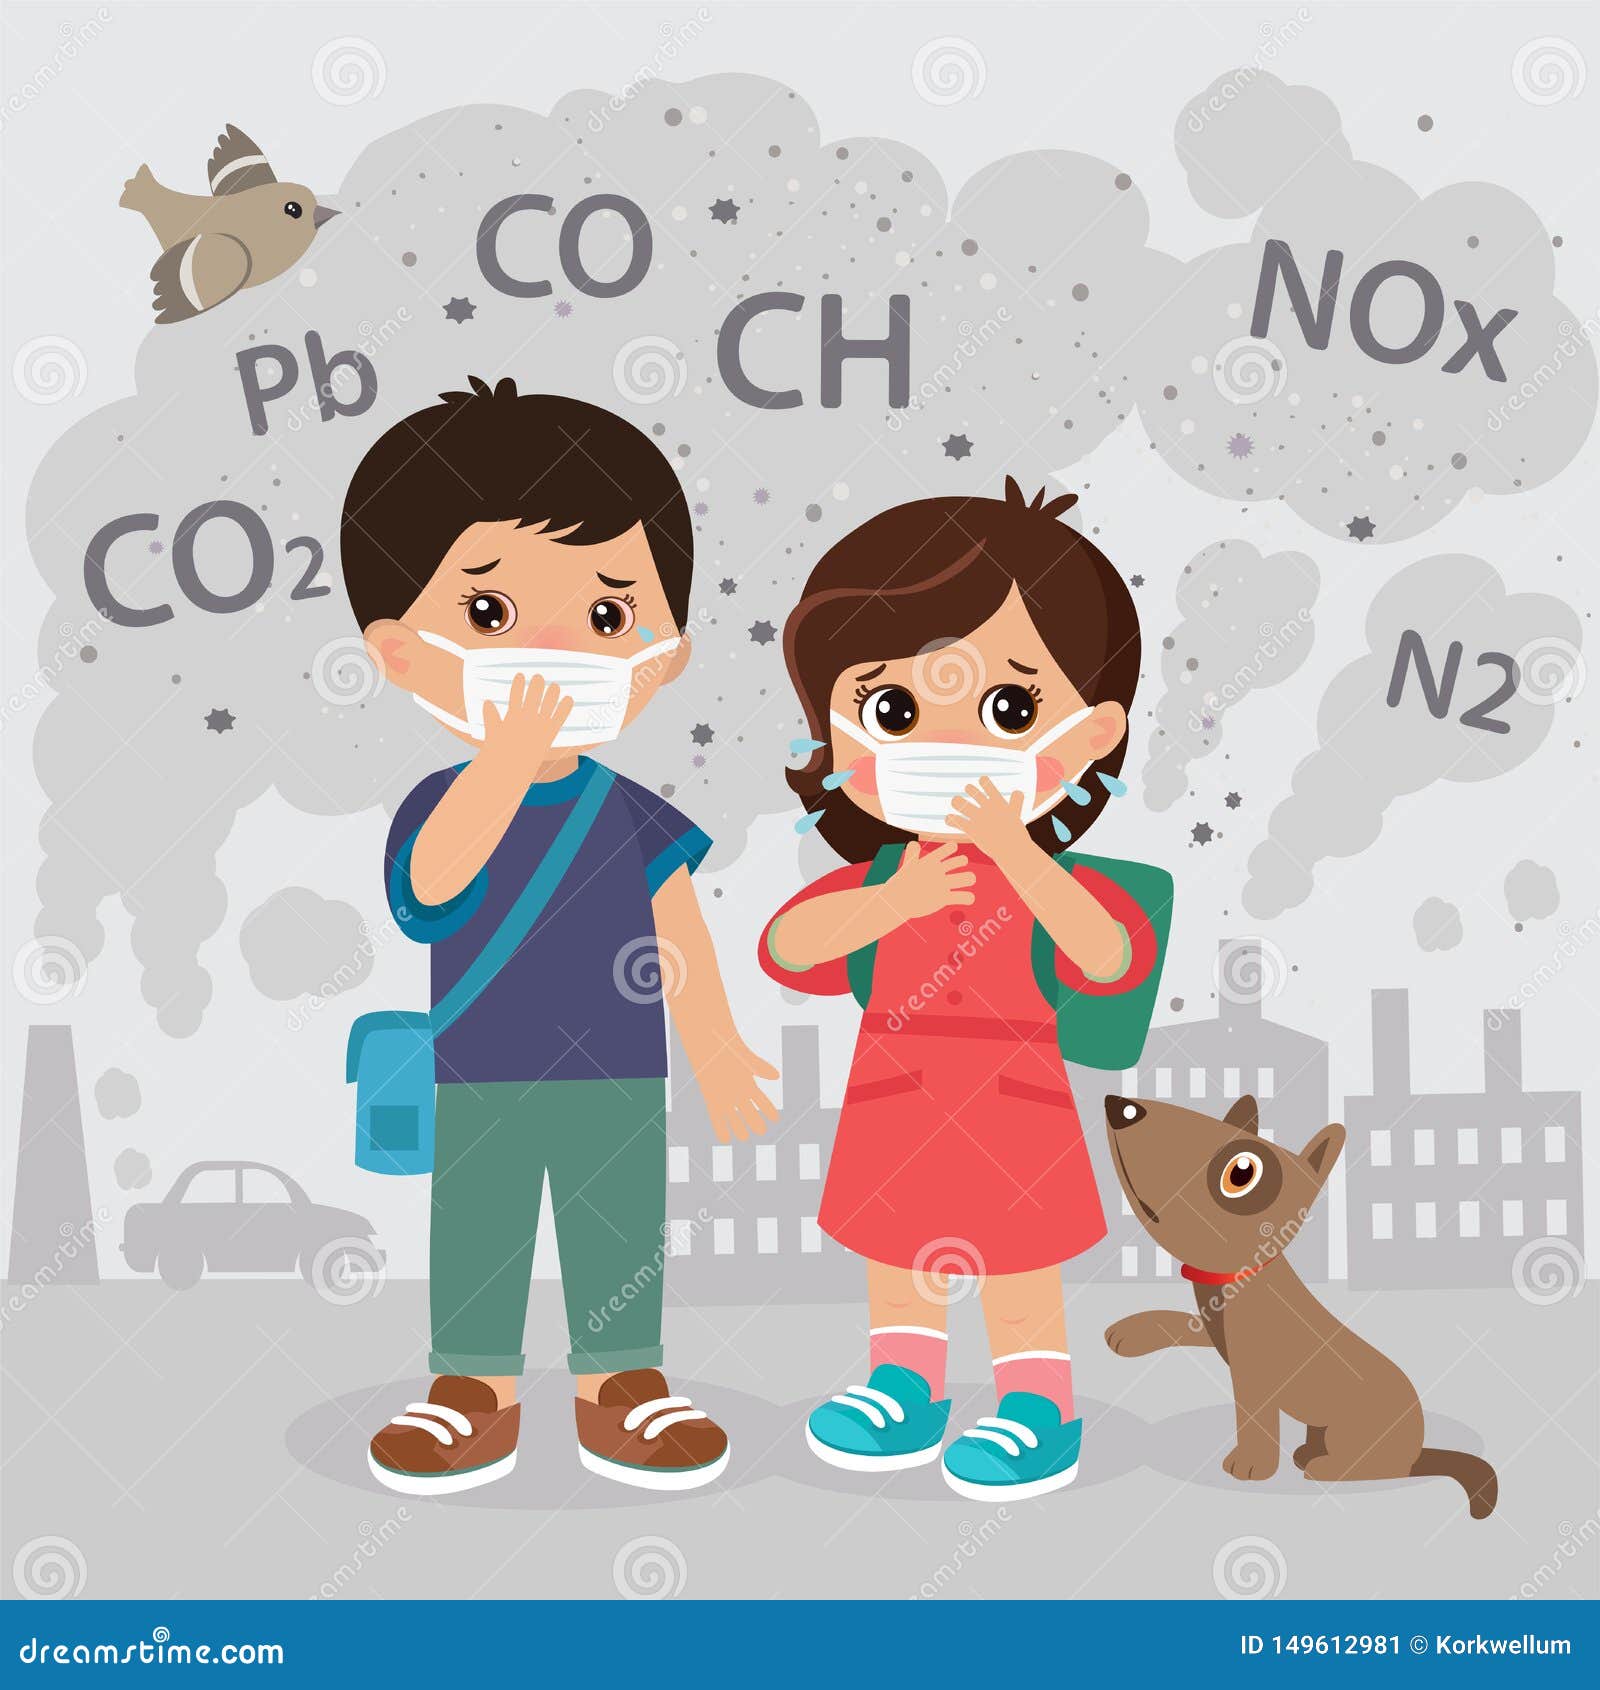 Ecology Concept Air Pollution. Co2, Pb, Ch, Nox Emissions Cloud Vector  Illustration Stock Vector - Illustration of danger, people: 149612981